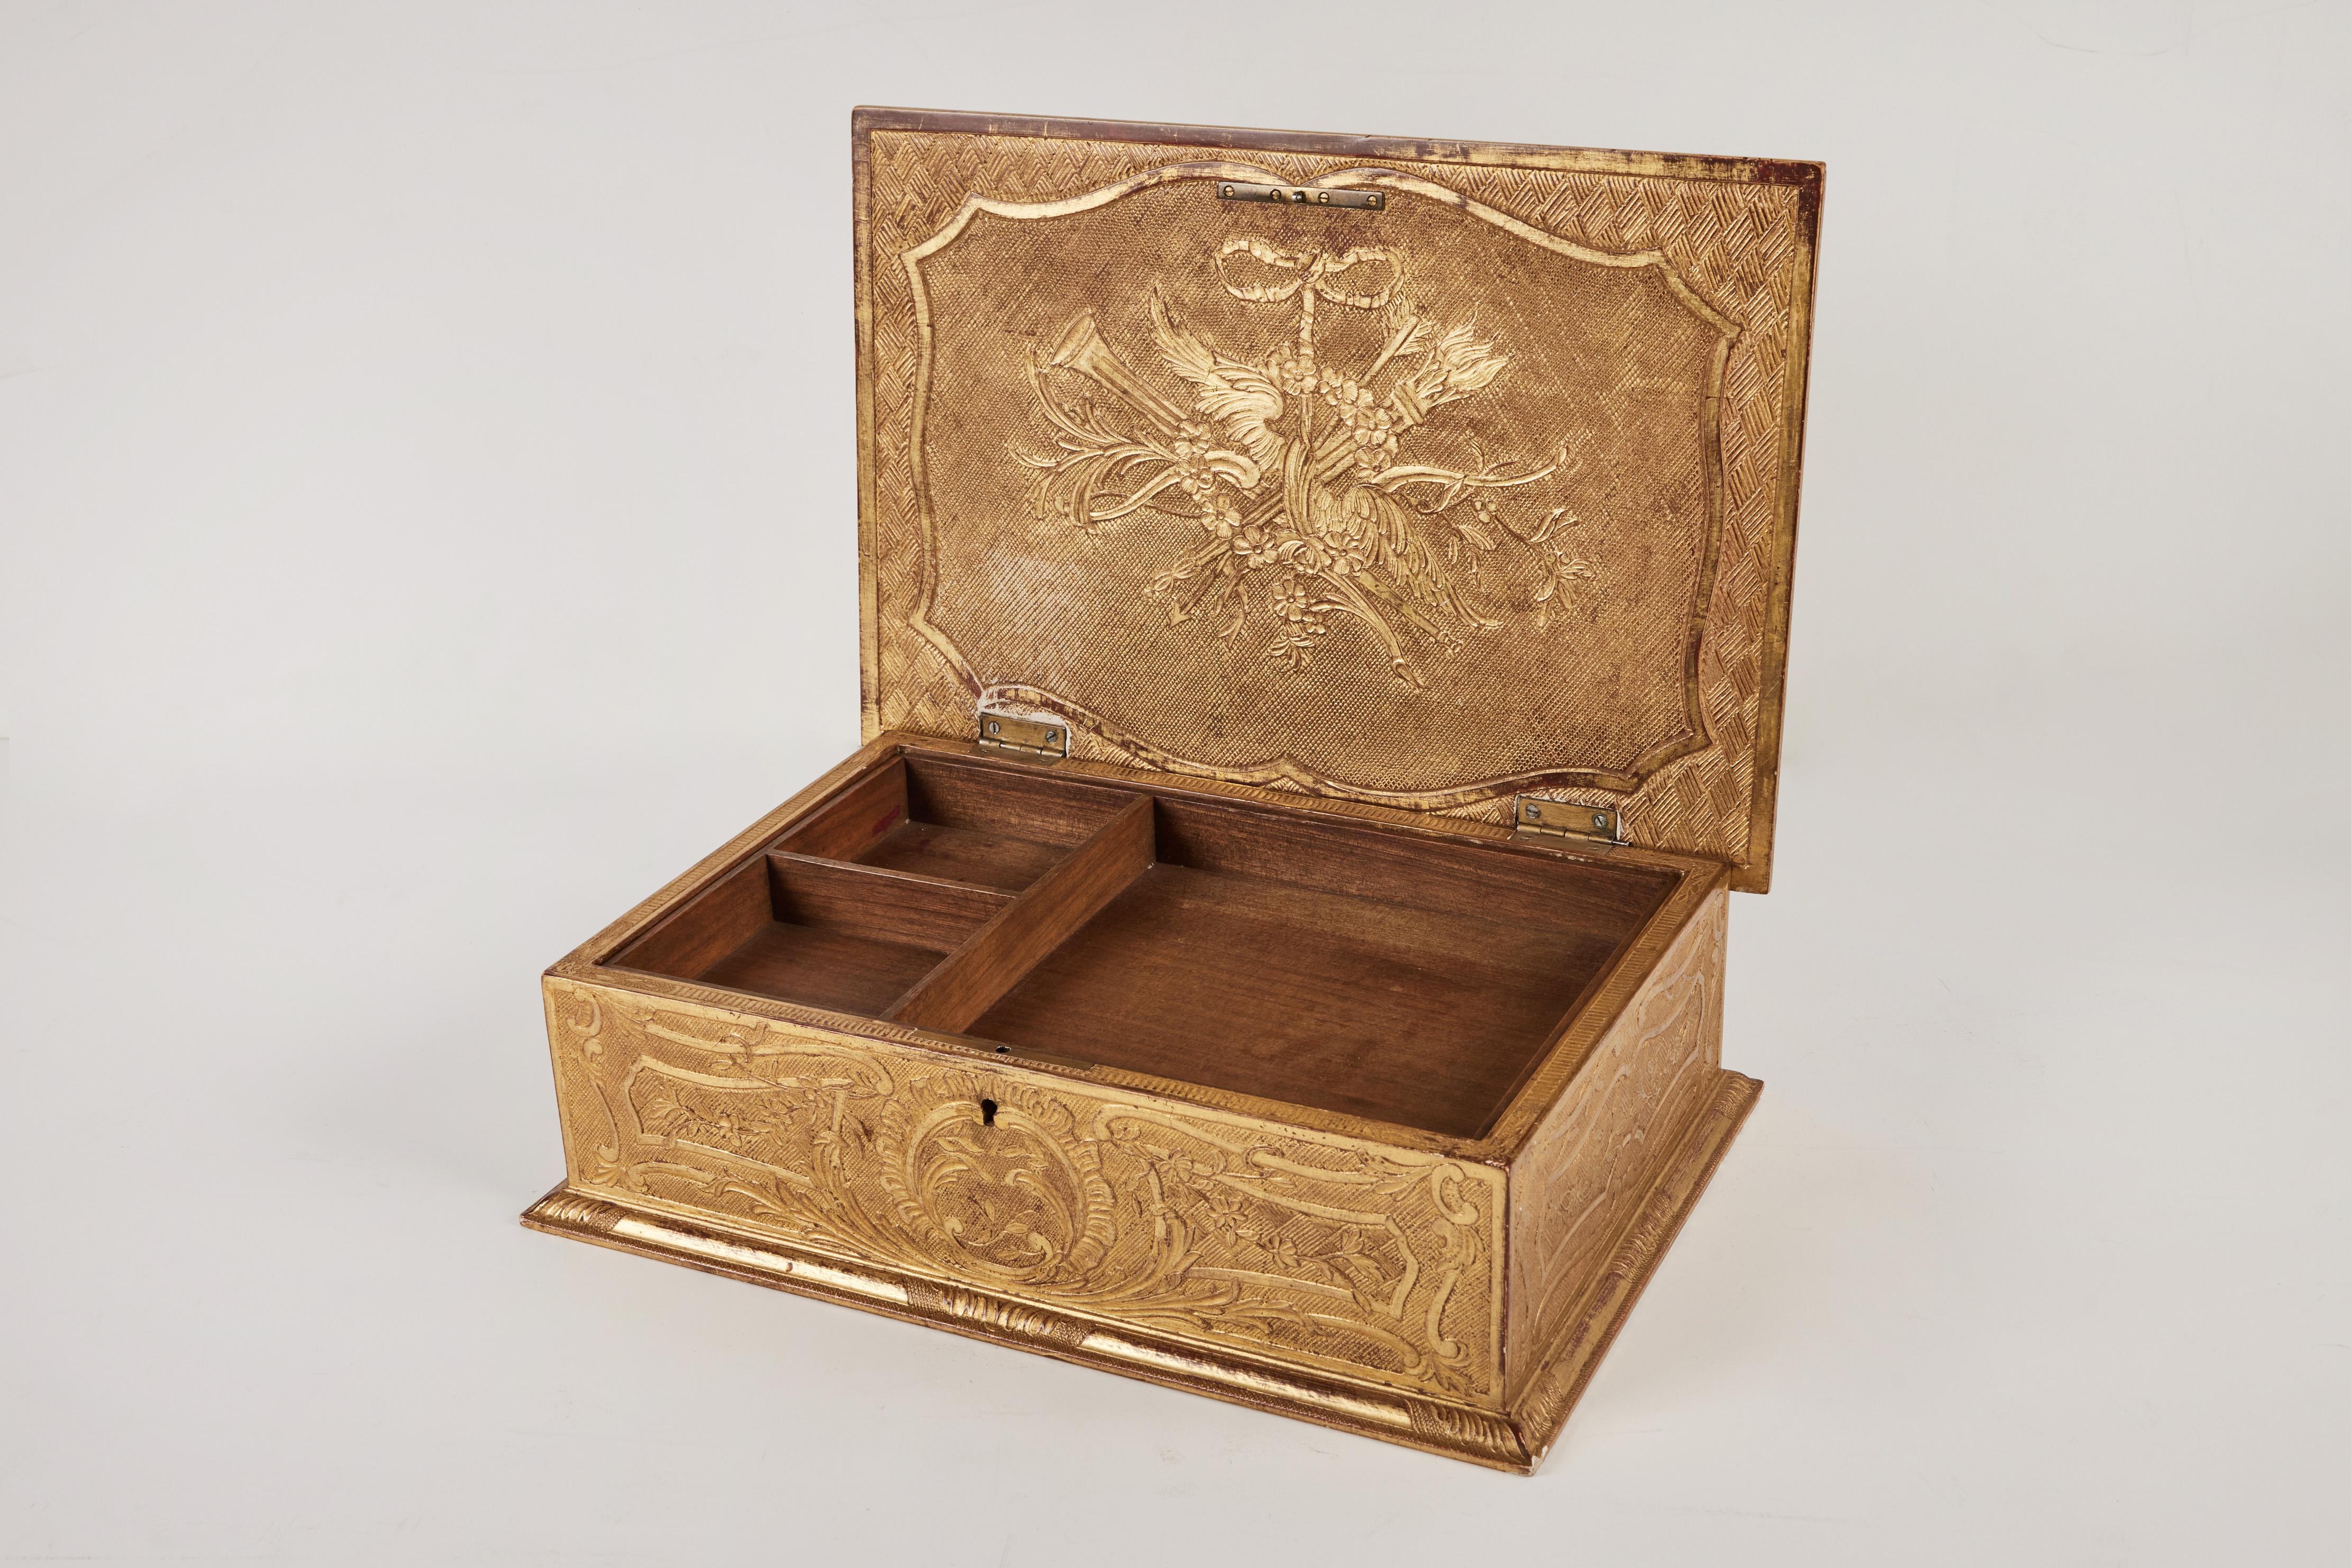 Hand-Carved Carved Gilt Wood Box